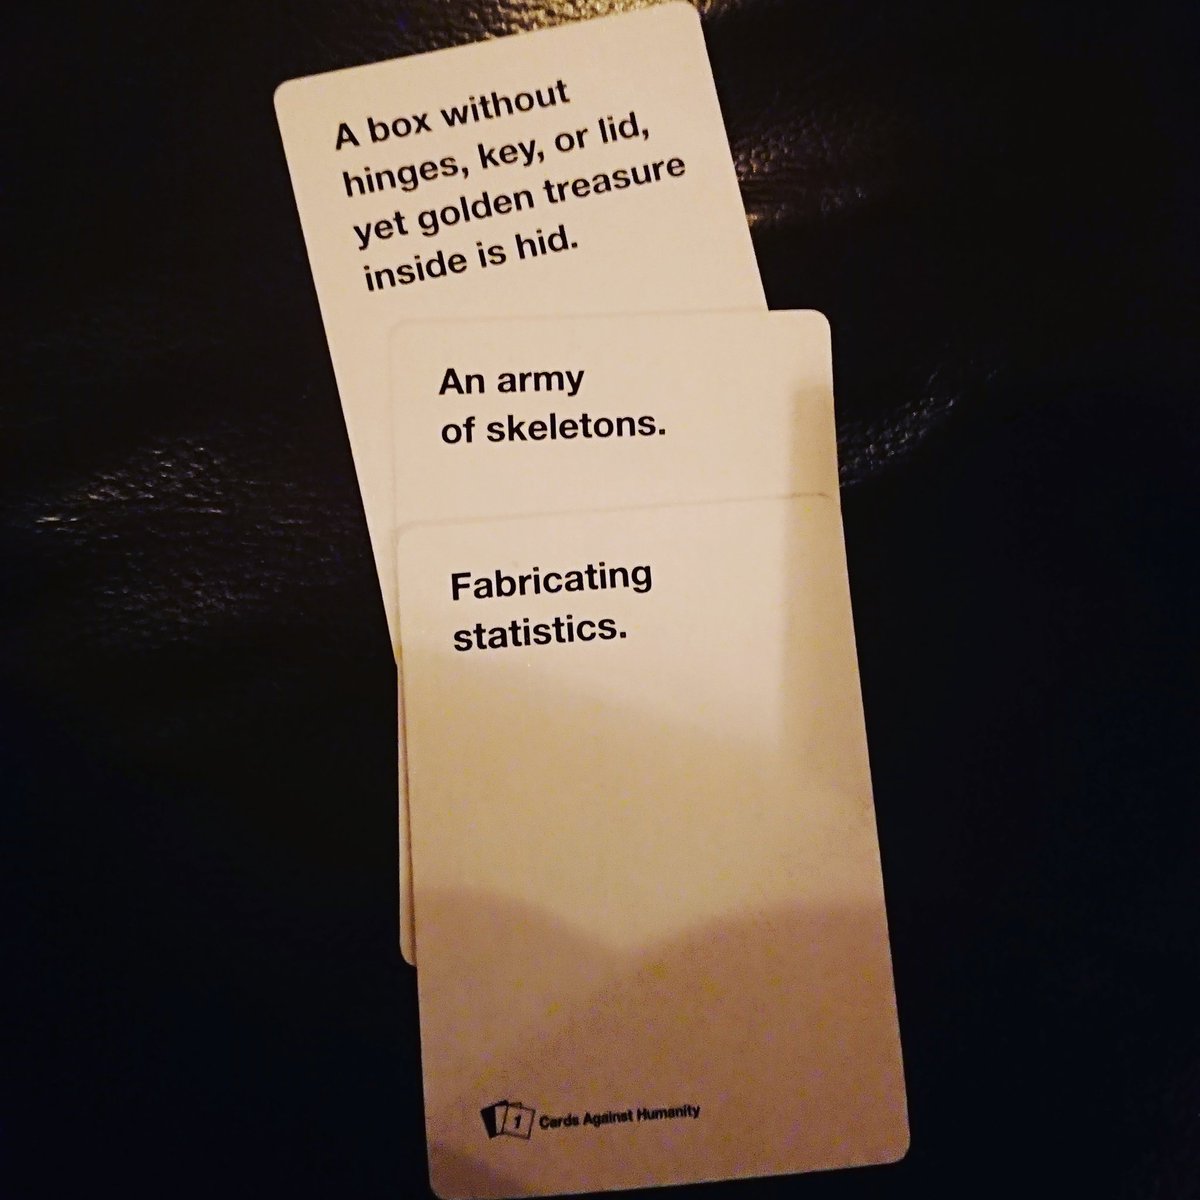 How To Make A Haiku In Cards Against Humanity